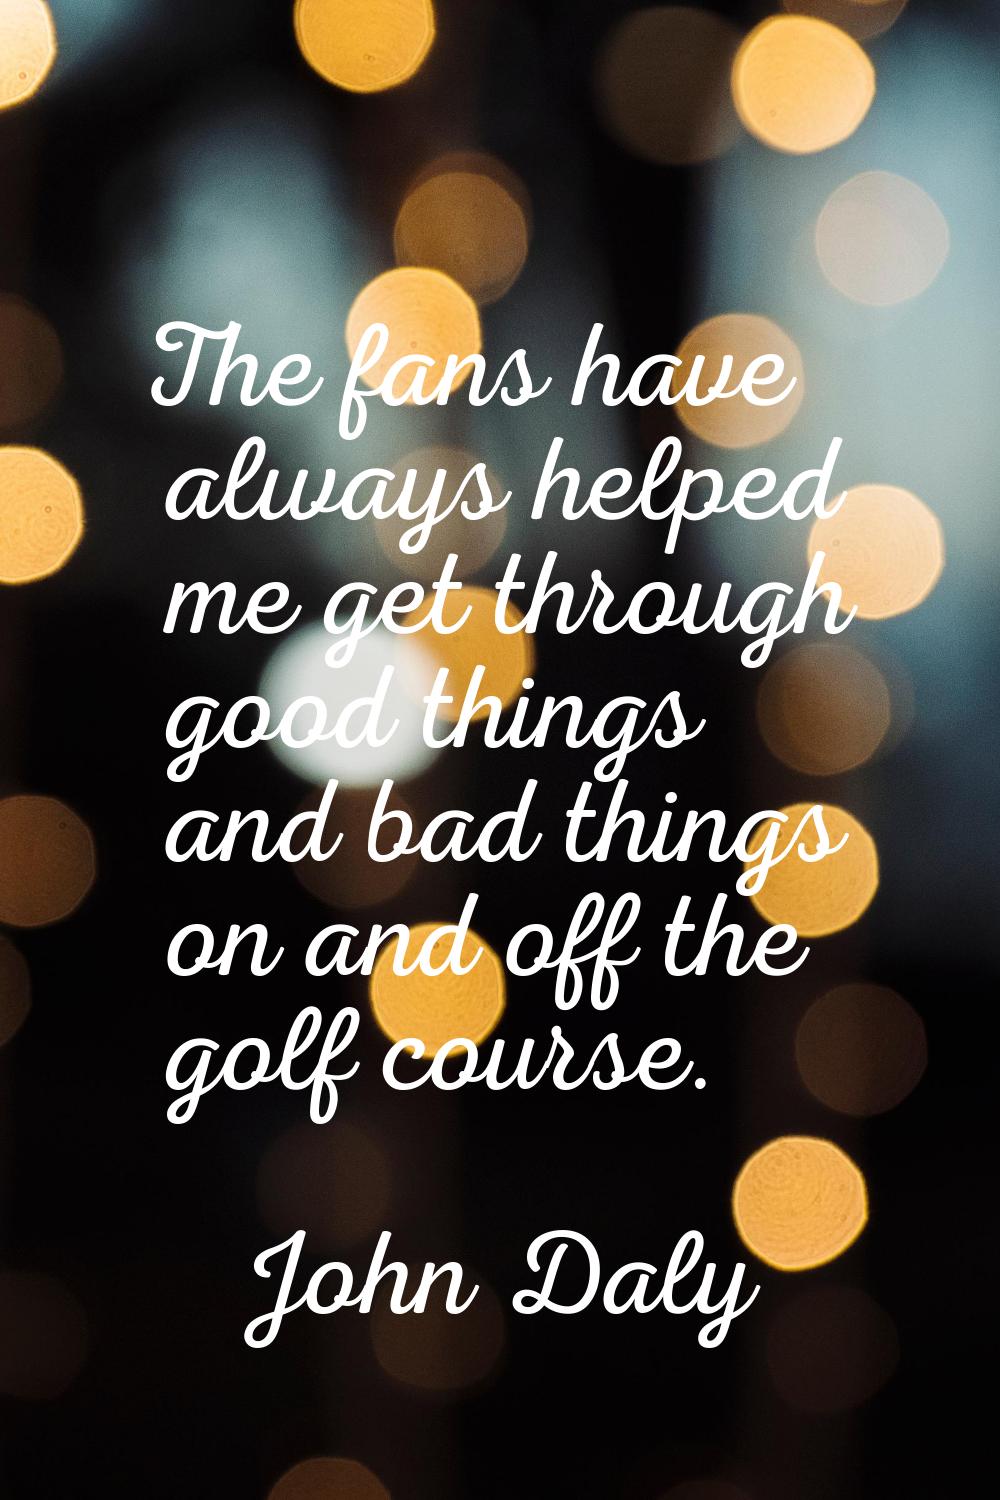 The fans have always helped me get through good things and bad things on and off the golf course.